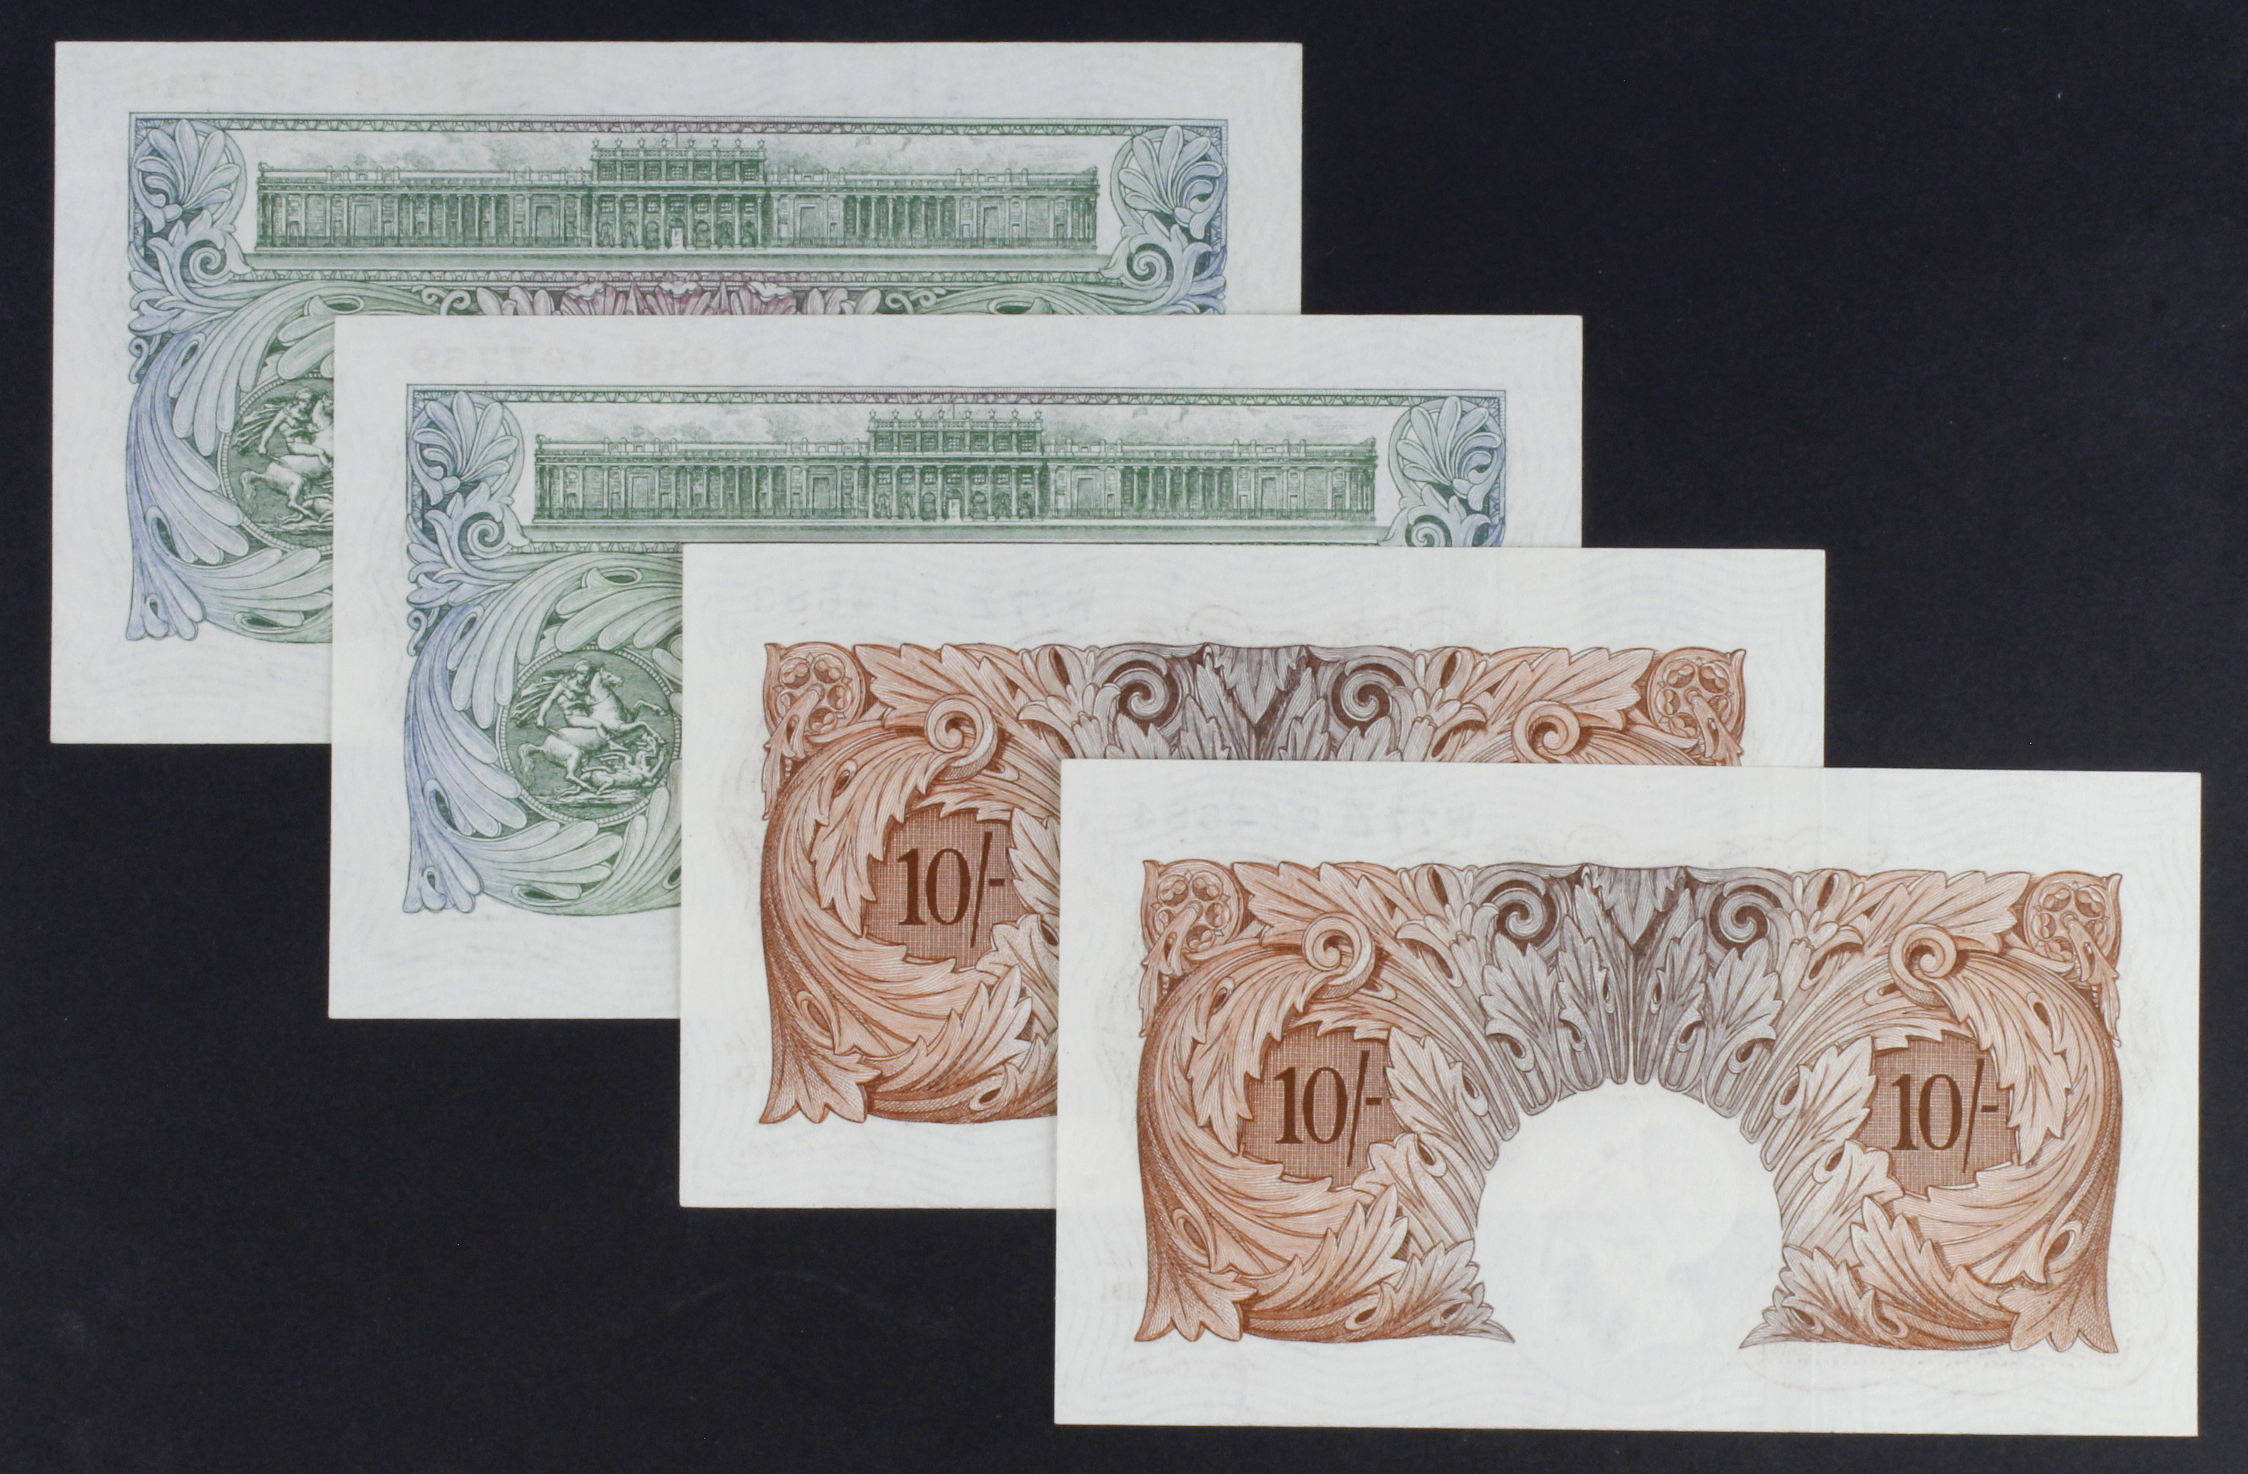 Beale (4), 10 Shillings (2) issued 1950, a consecutively numbered pair, serial W77Z 214683 & W77Z - Image 2 of 2